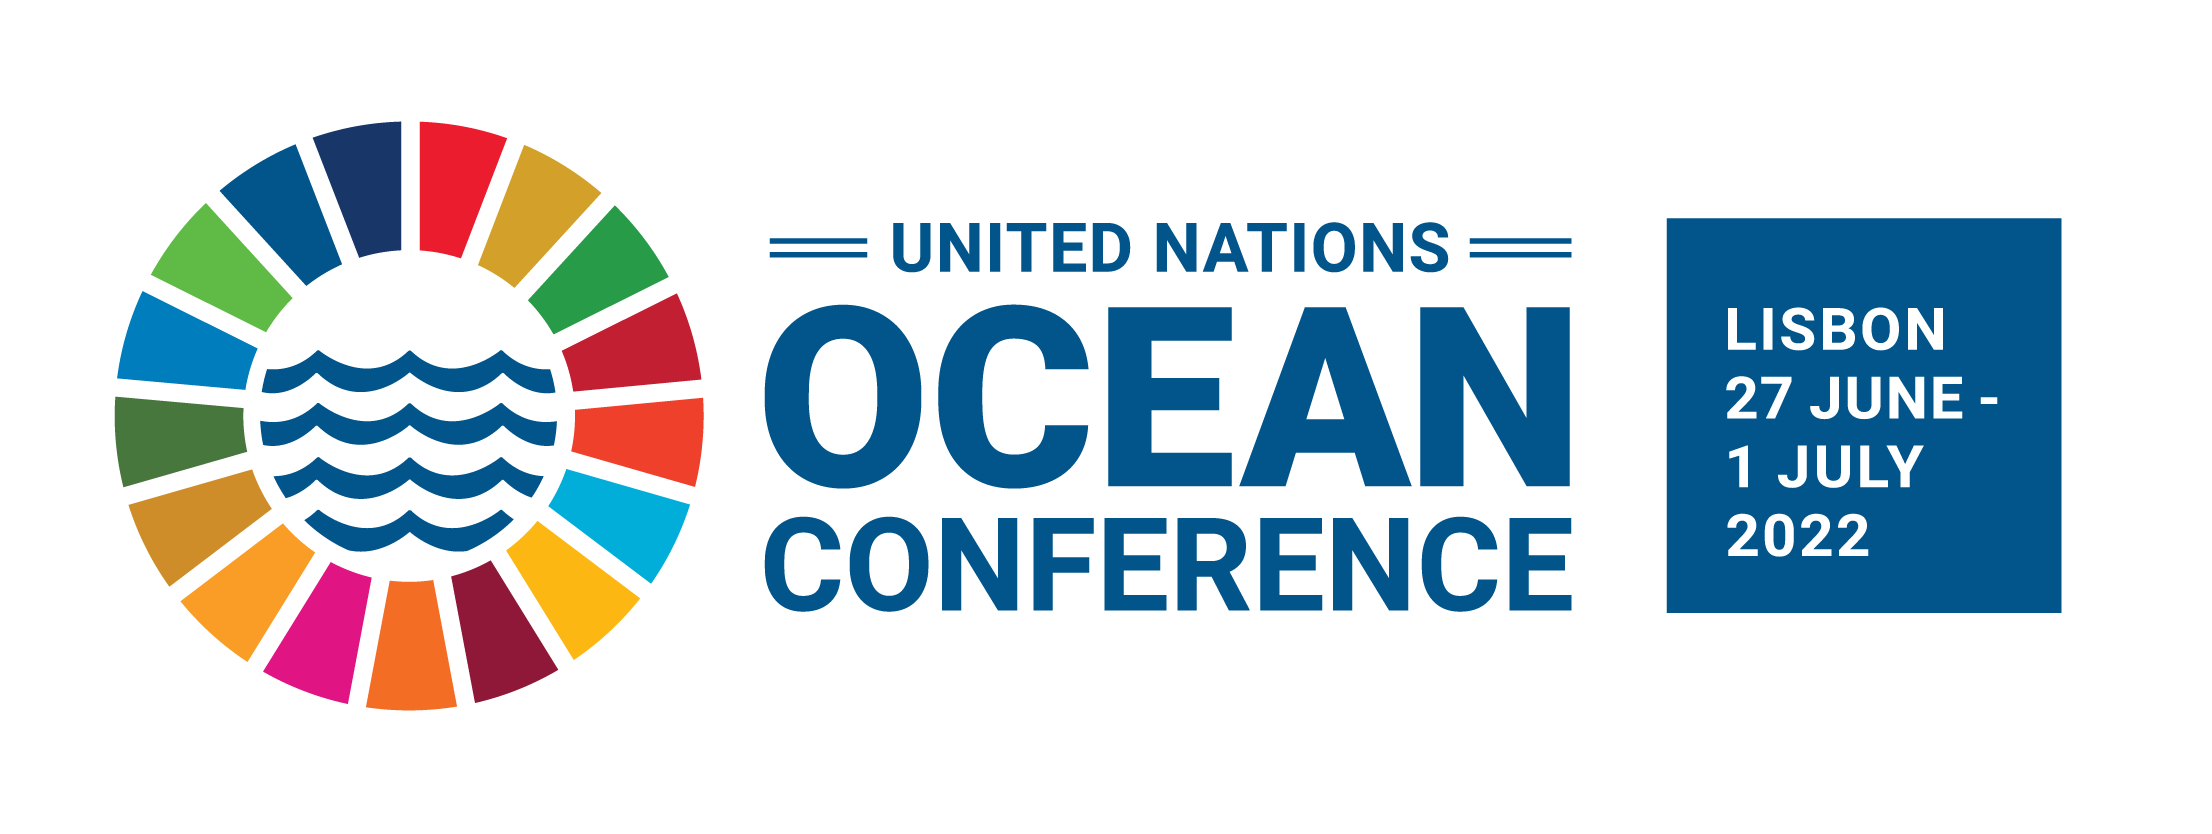 UNOC22 Event's Summary Published